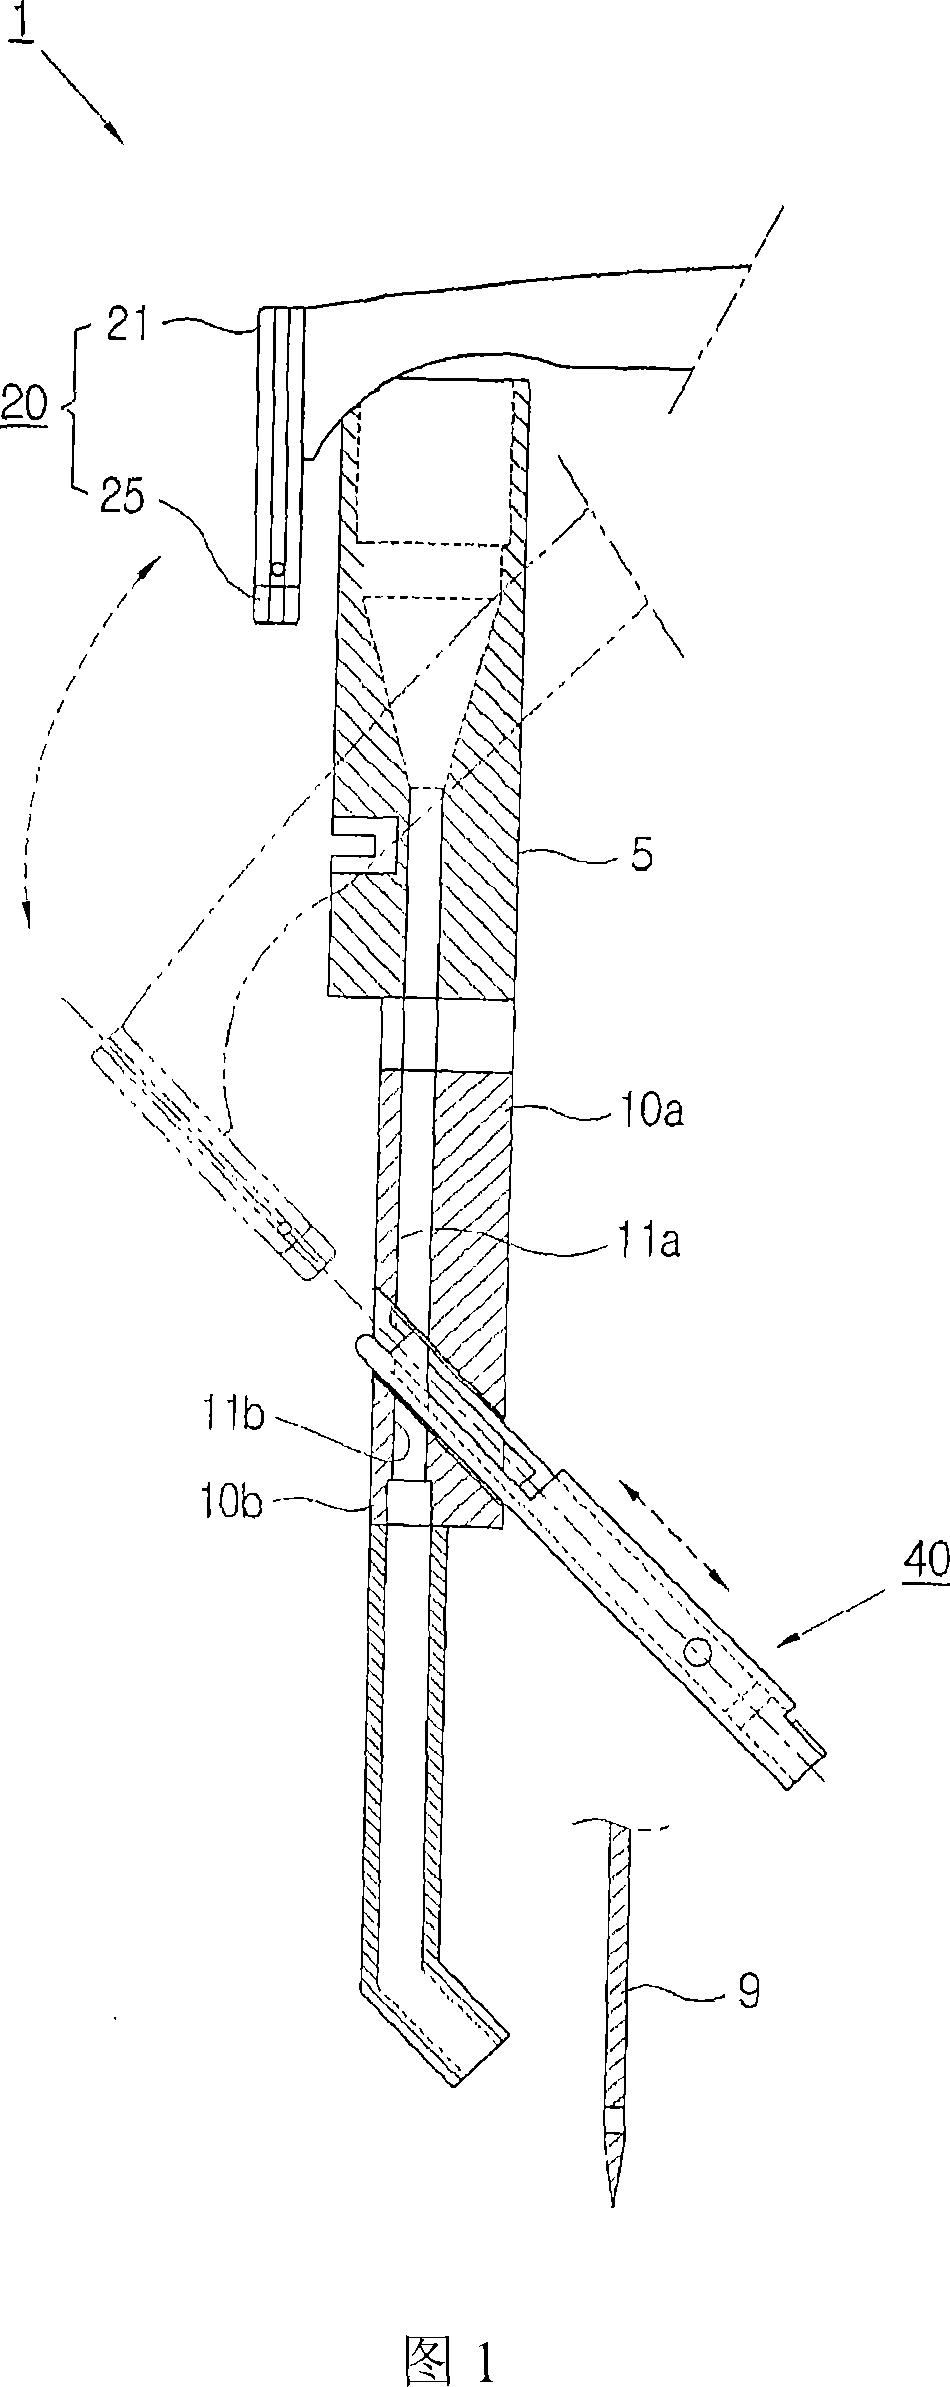 Thread feeding apparatus for an automatic embroidering machine